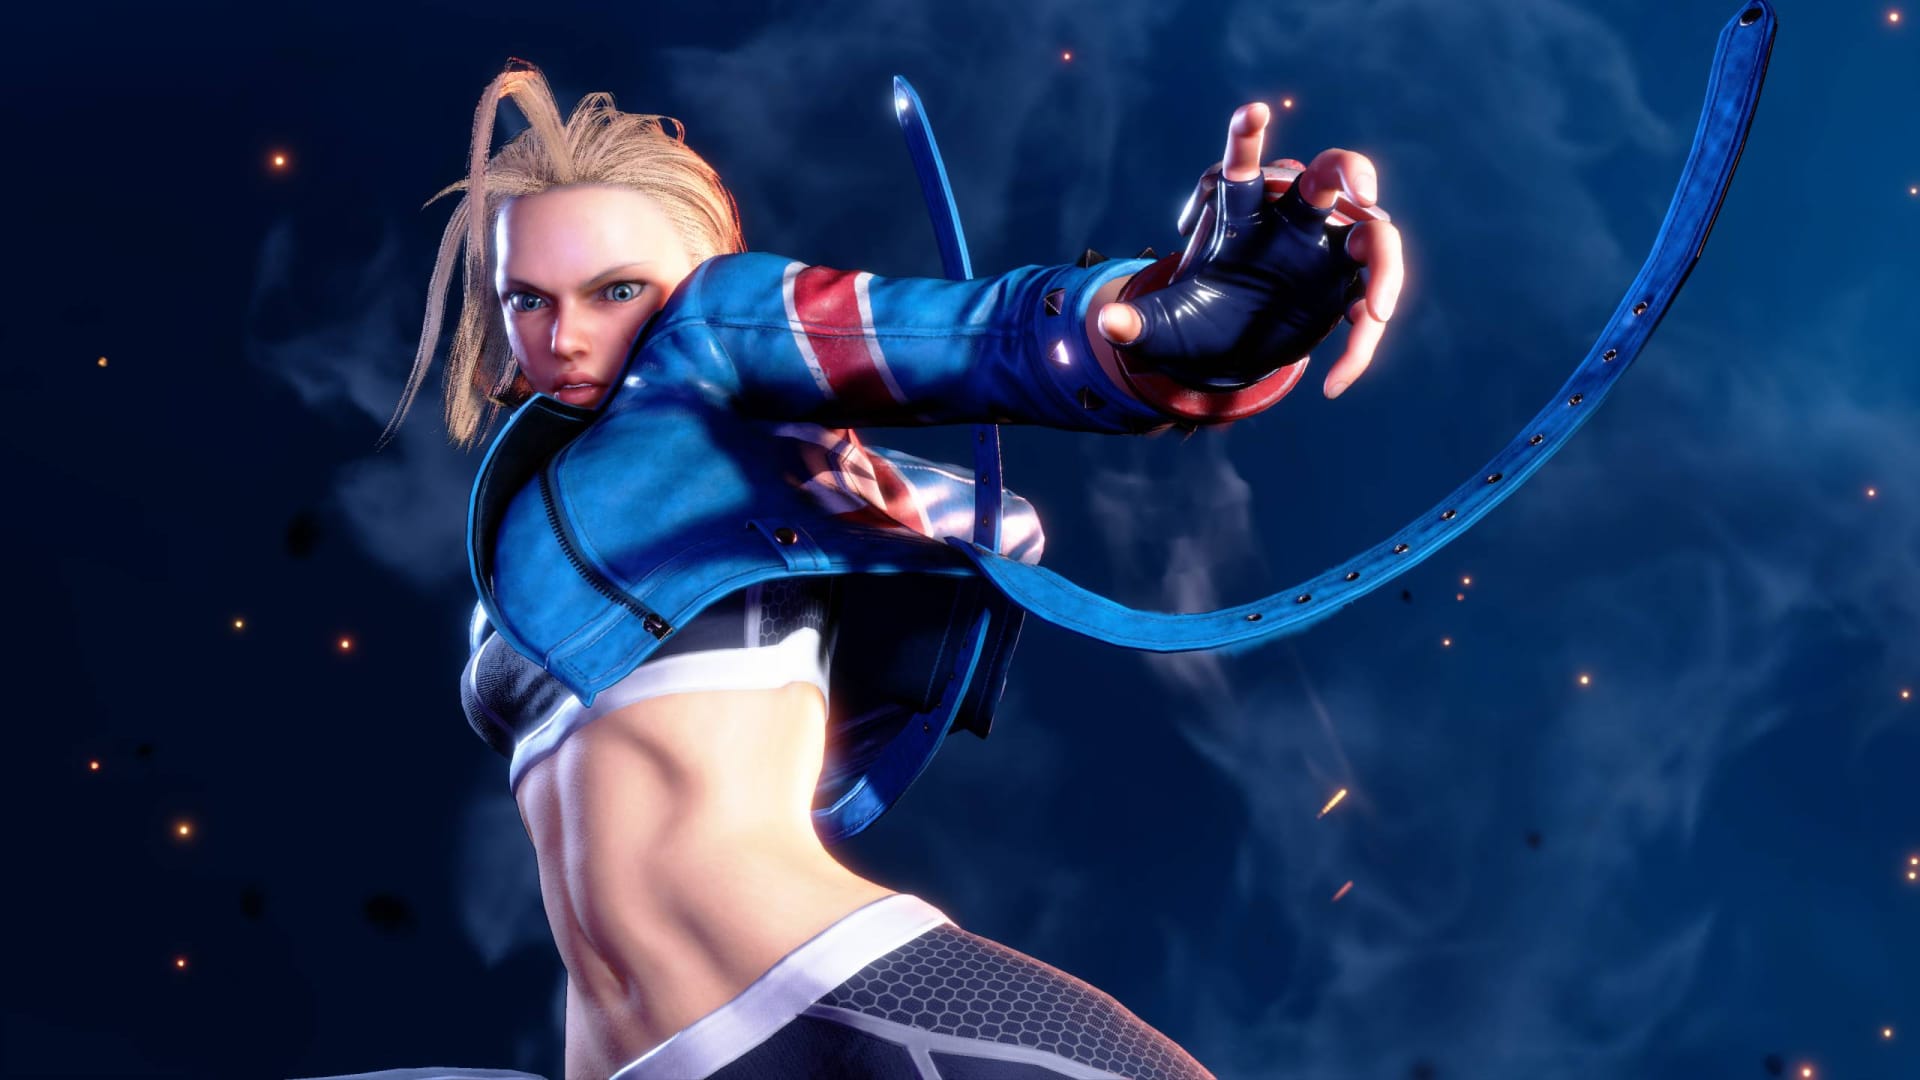 Cammy  Cammy street fighter, Street fighter characters, Super